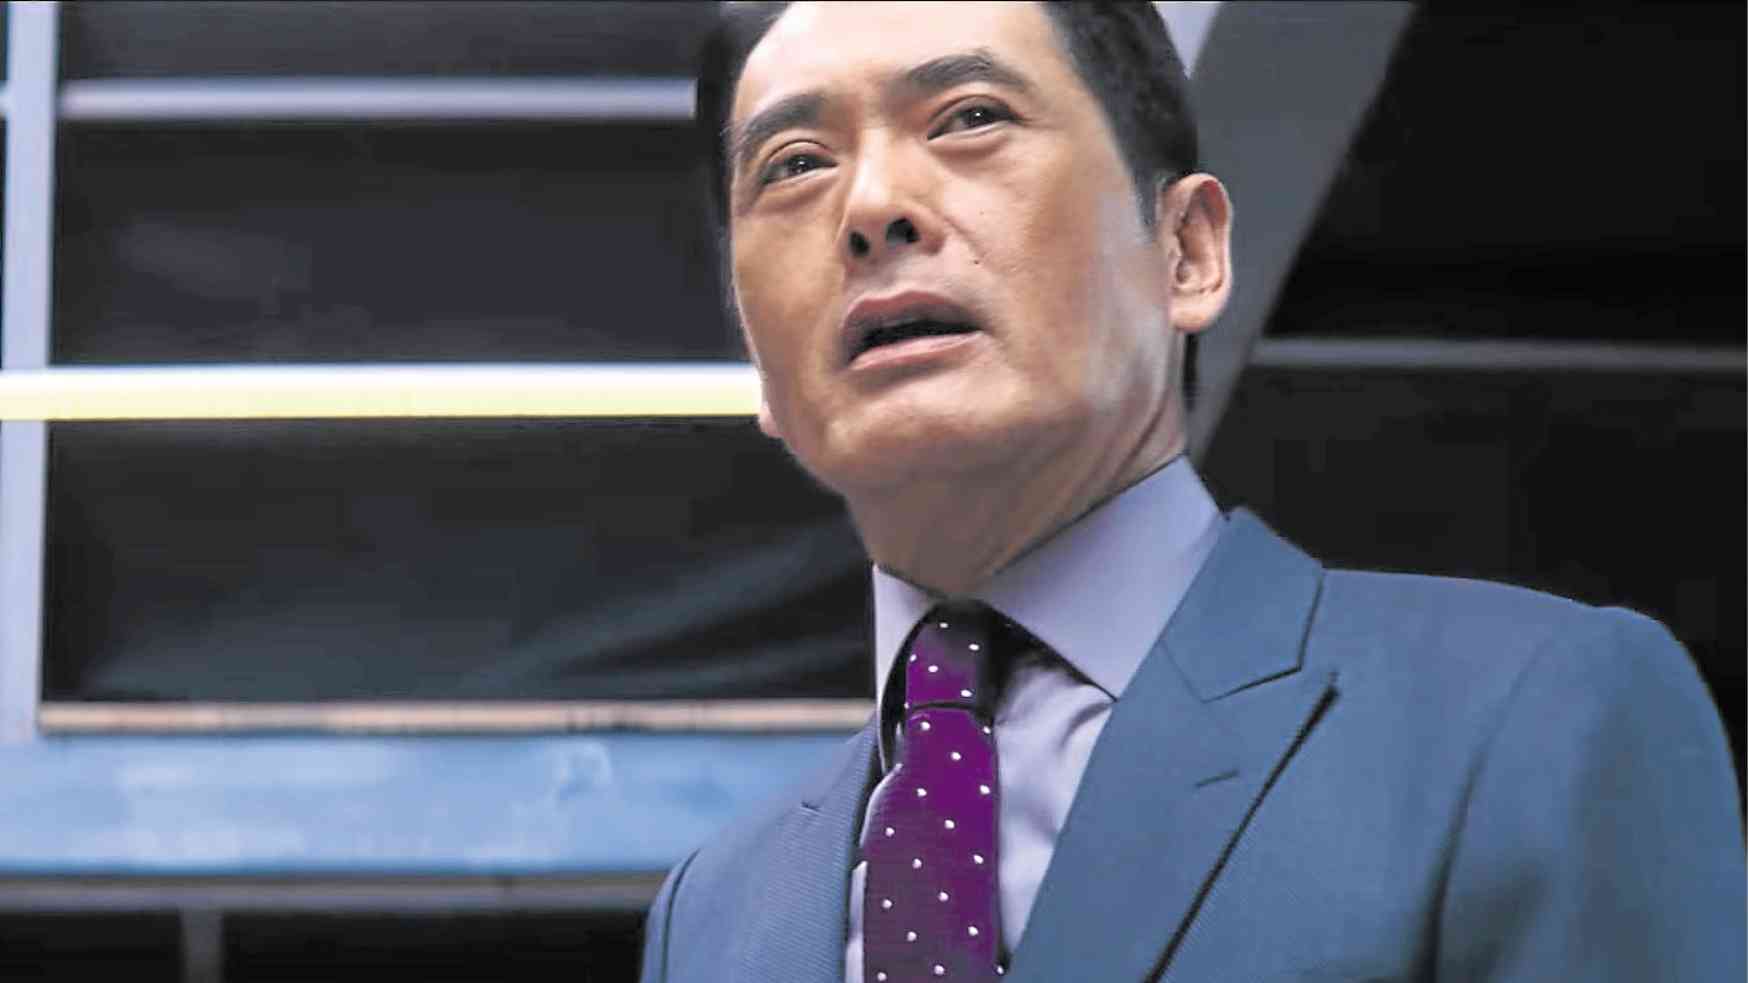 'Crouching Tiger' star Chow Yun-fat vows to donate fortune